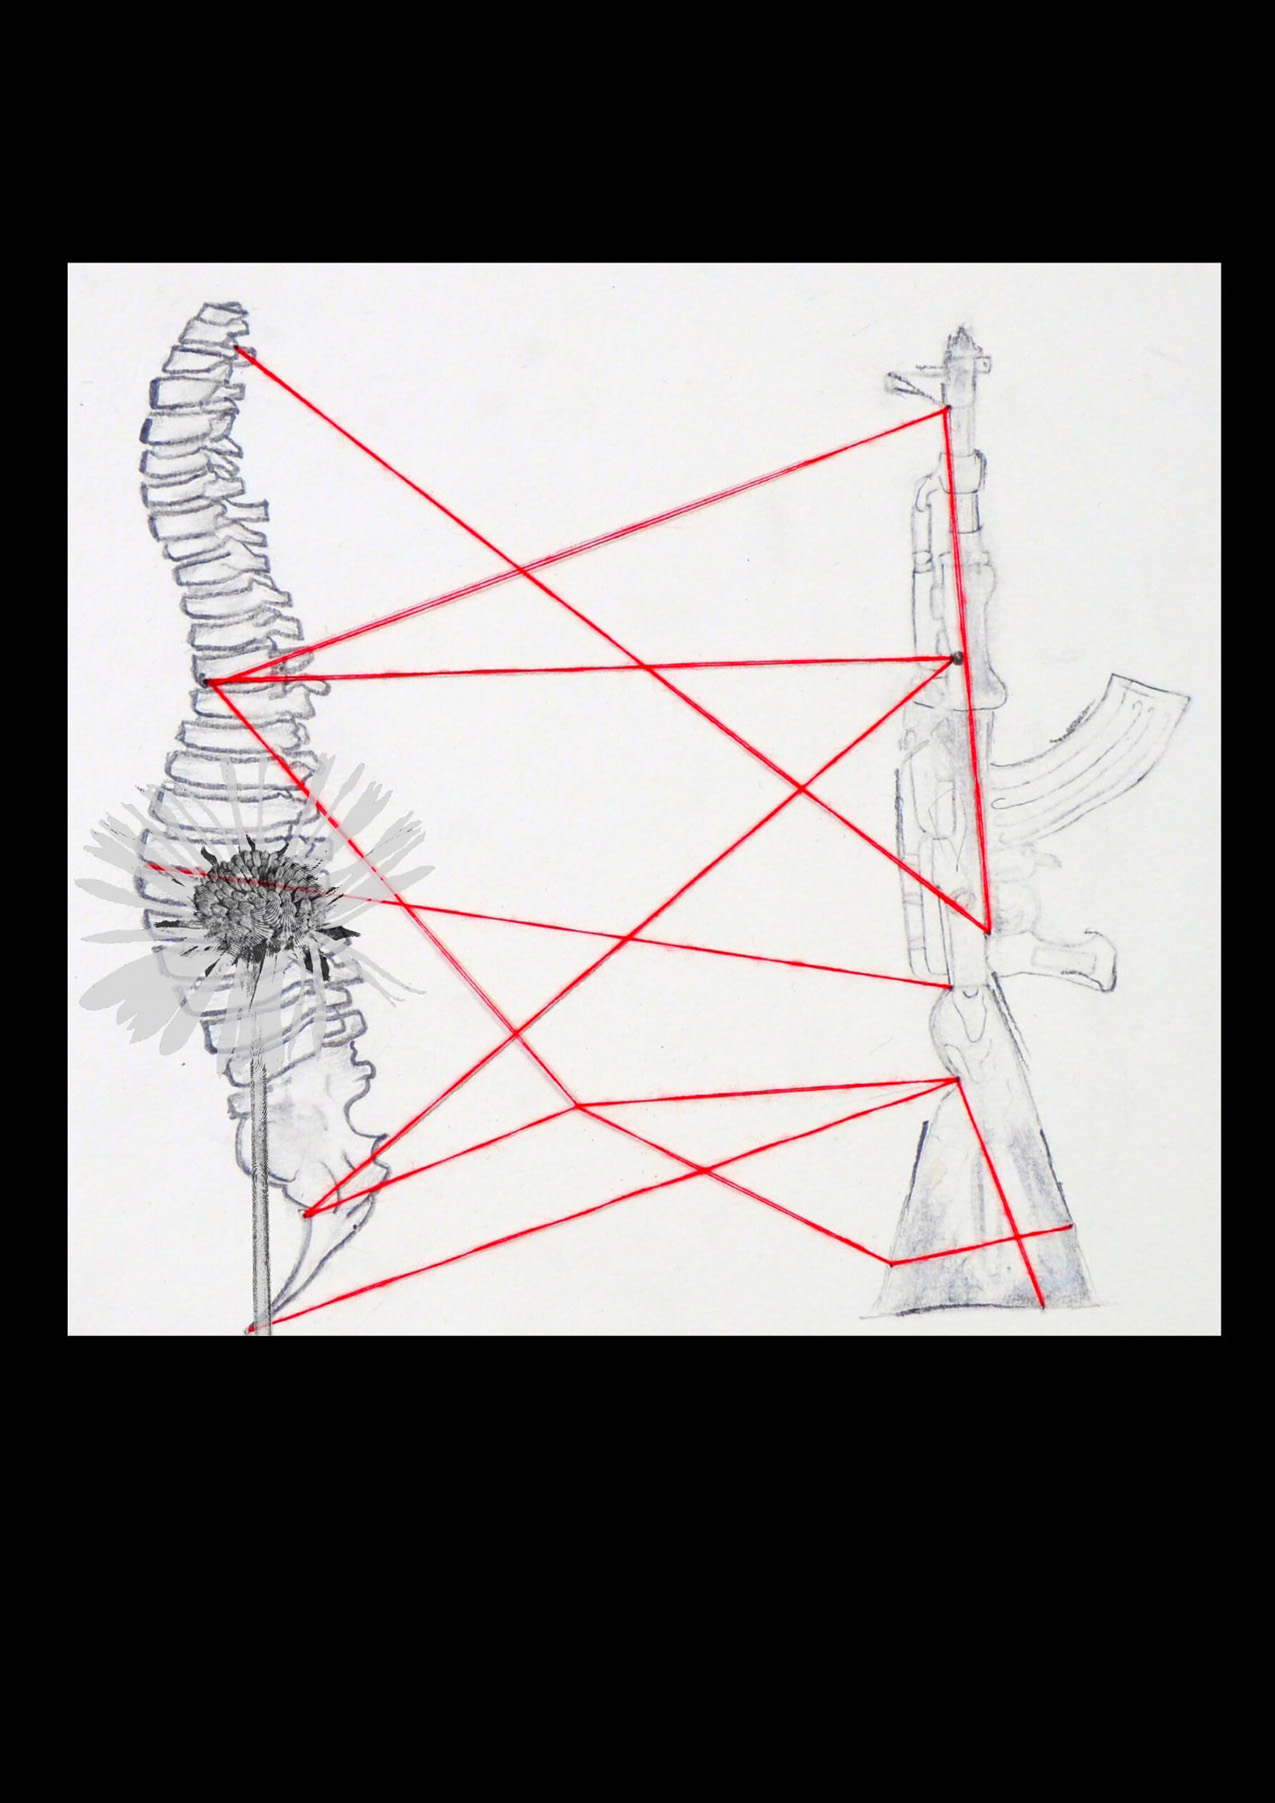 a drawing of a spine and a flower are connected to a drawing of a machine gun with red thread